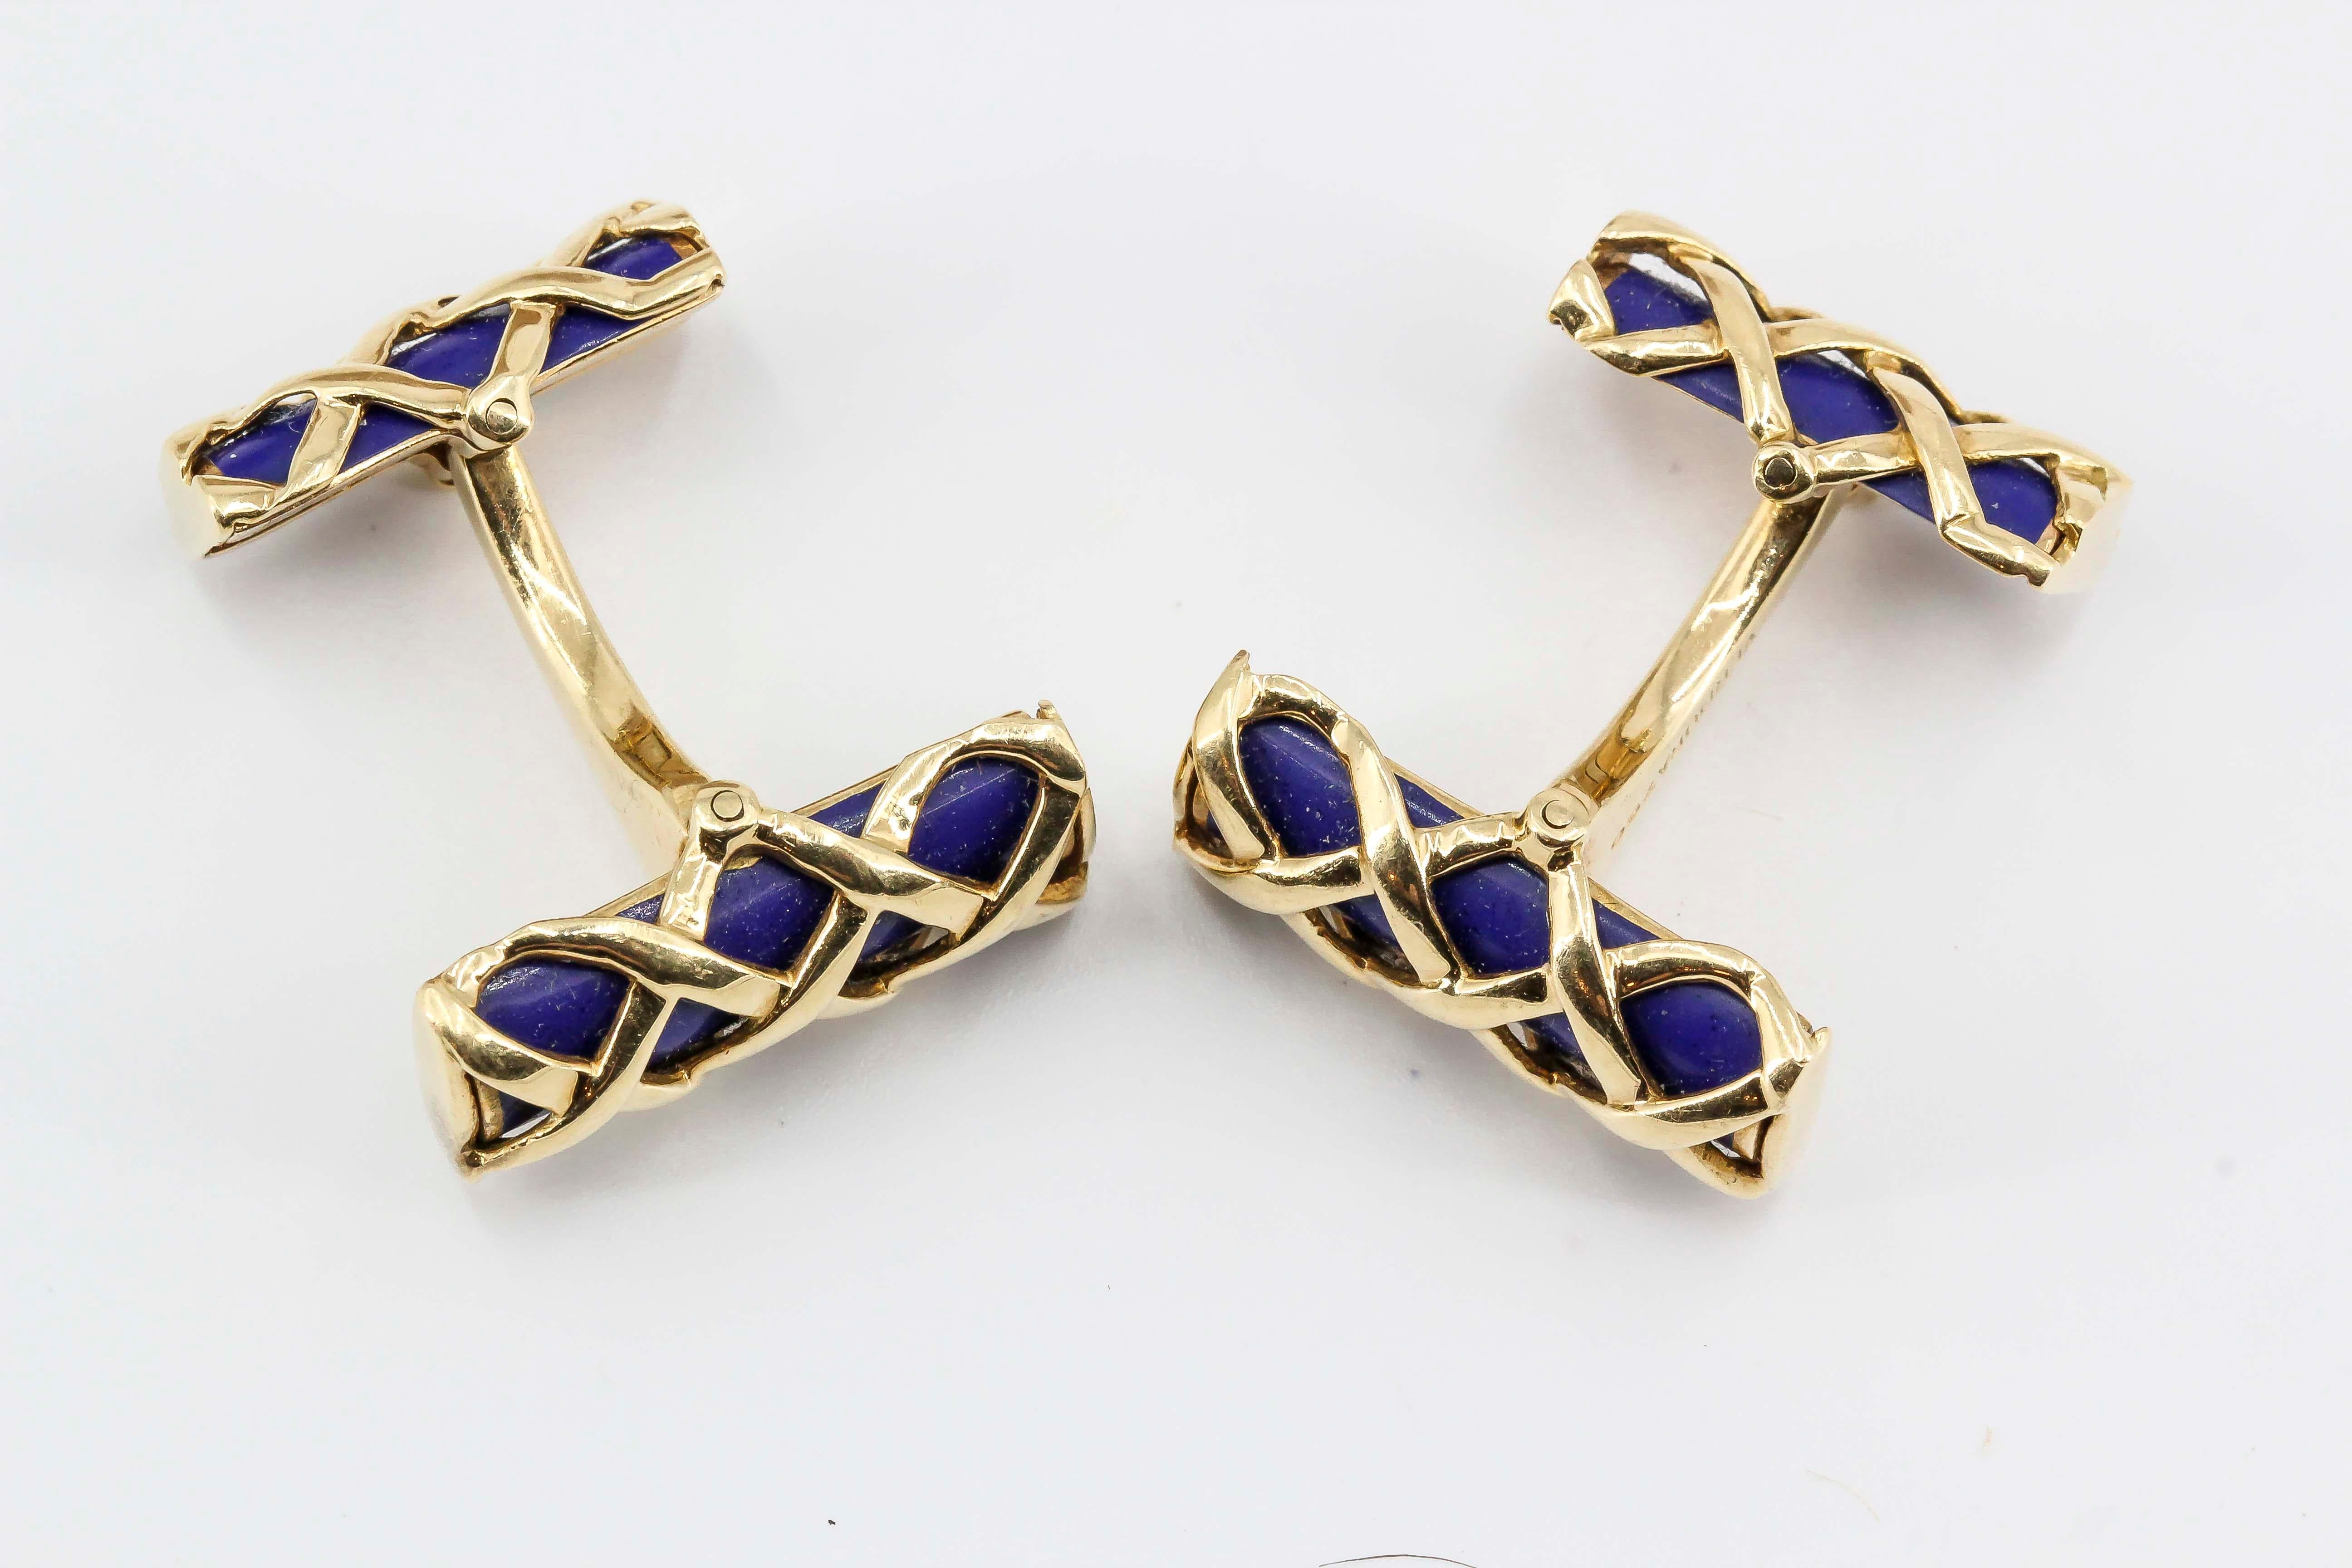 Scarce blue lapis and 18K yellow gold bar cufflinks from the 